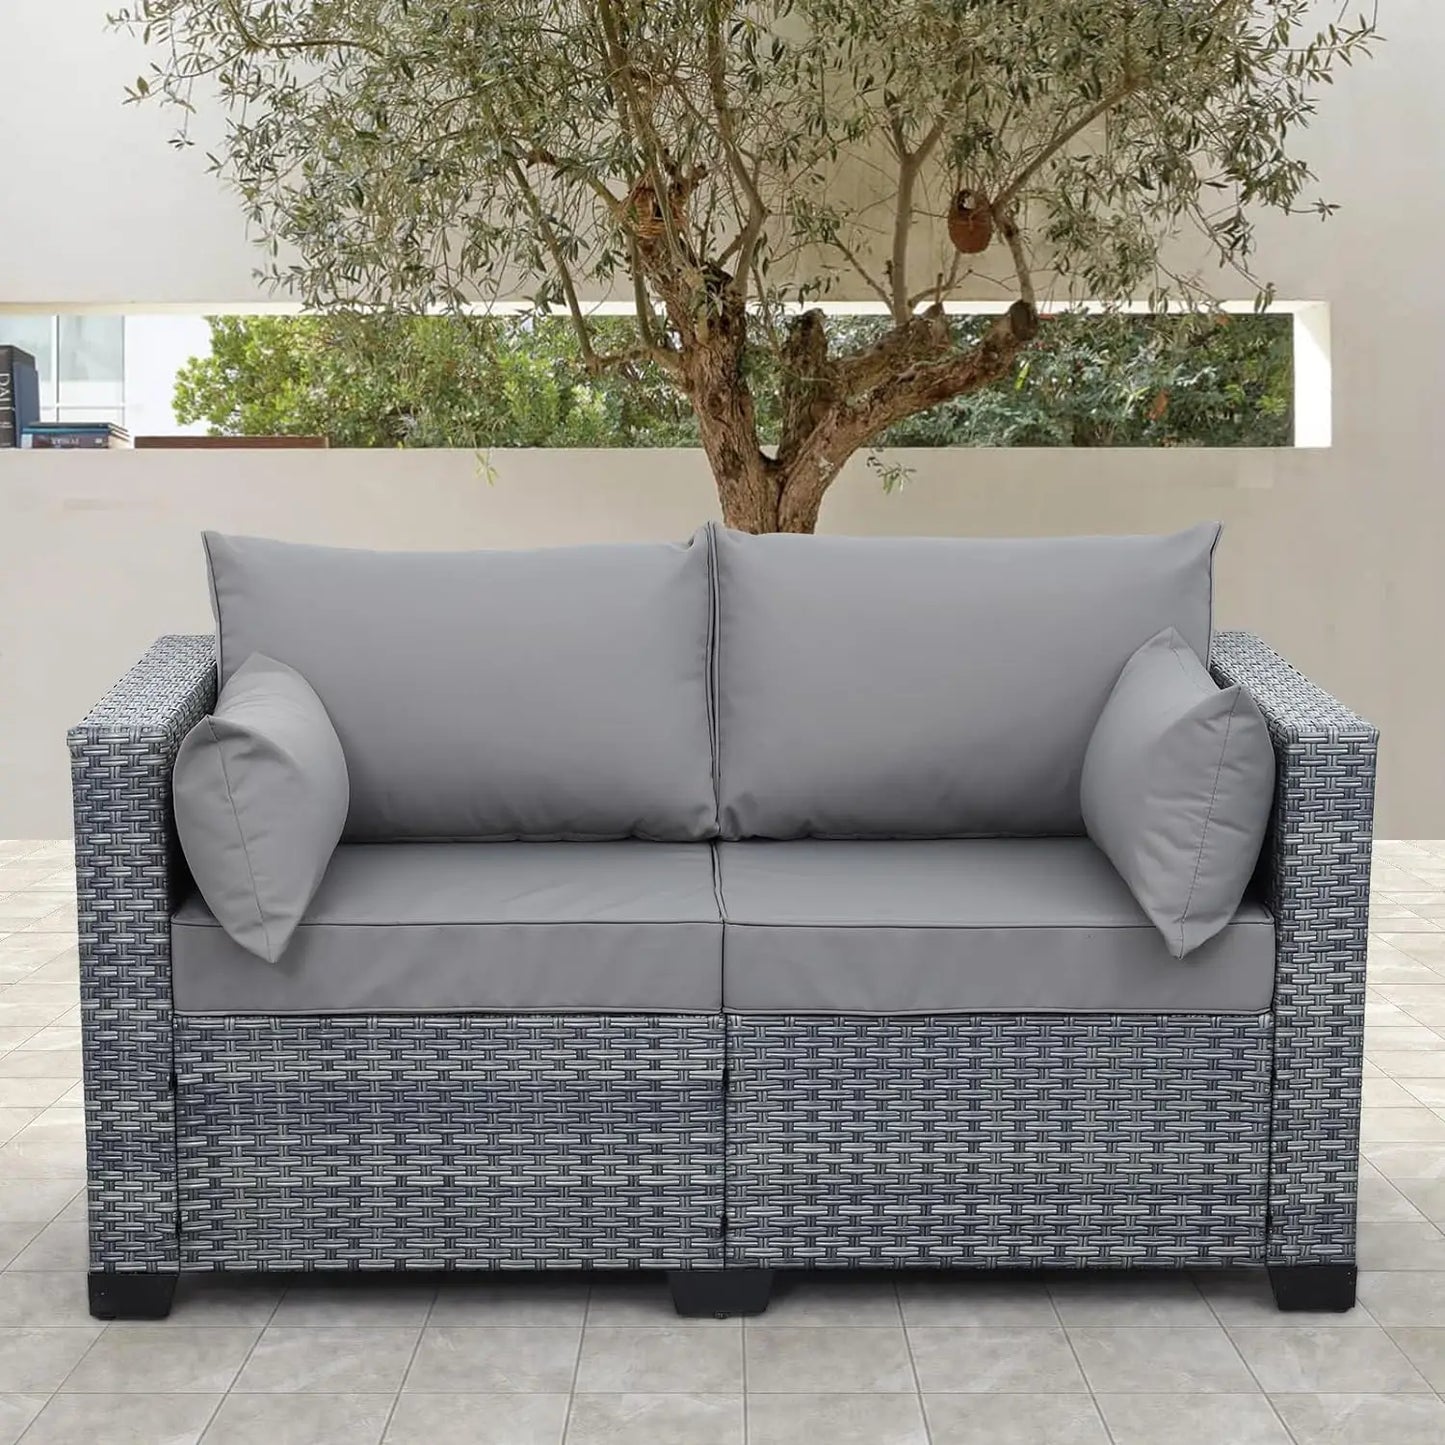 Outdoor Patio Loveseat Sofa, 2-Seater Small Couch, All Weather Wicker Love Seat Furniture with Grey Cushions